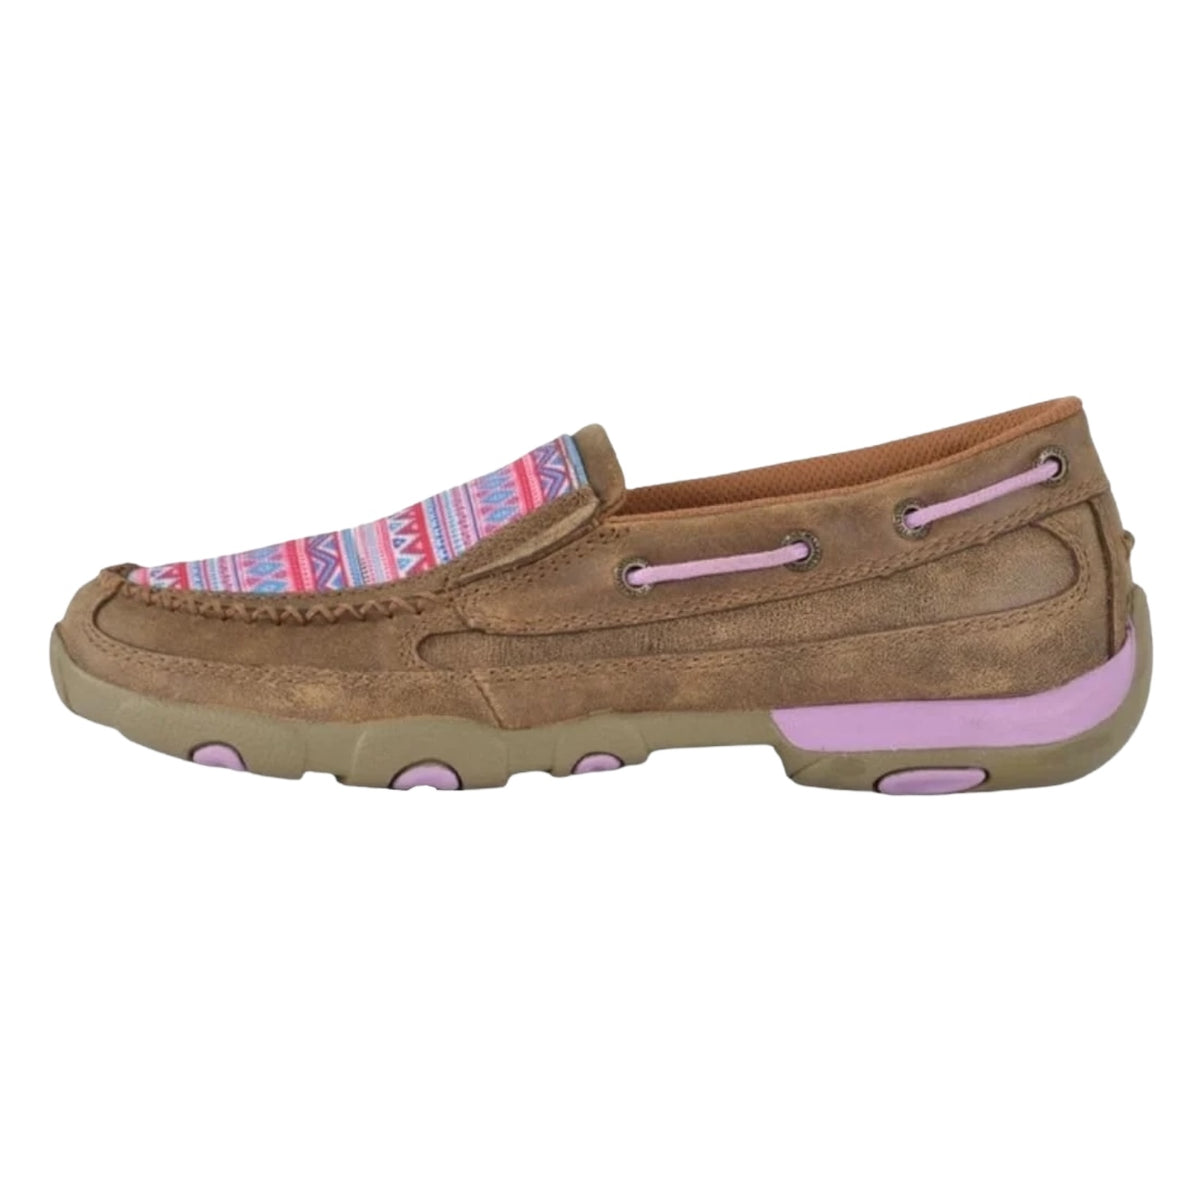 Casual Driving Slip On Mocs - Lilac Aztec